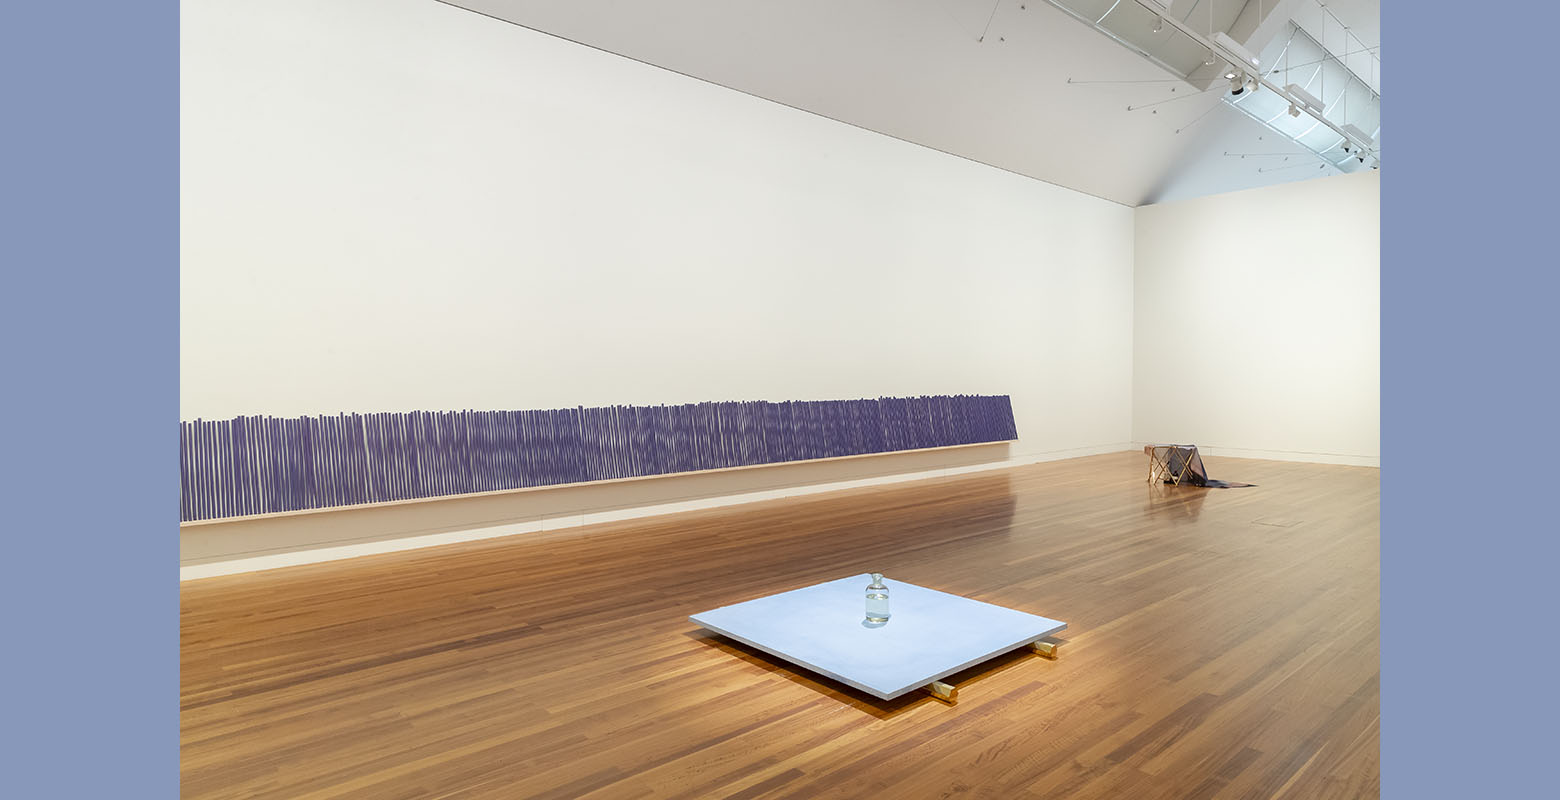 View of an expansive room with white walls and wooden floors. In the foreground, a glass jar filled with water is on a blue platform, sitting on gold hexagonal legs. Lined against the wall is a row of large purple incense sticks.